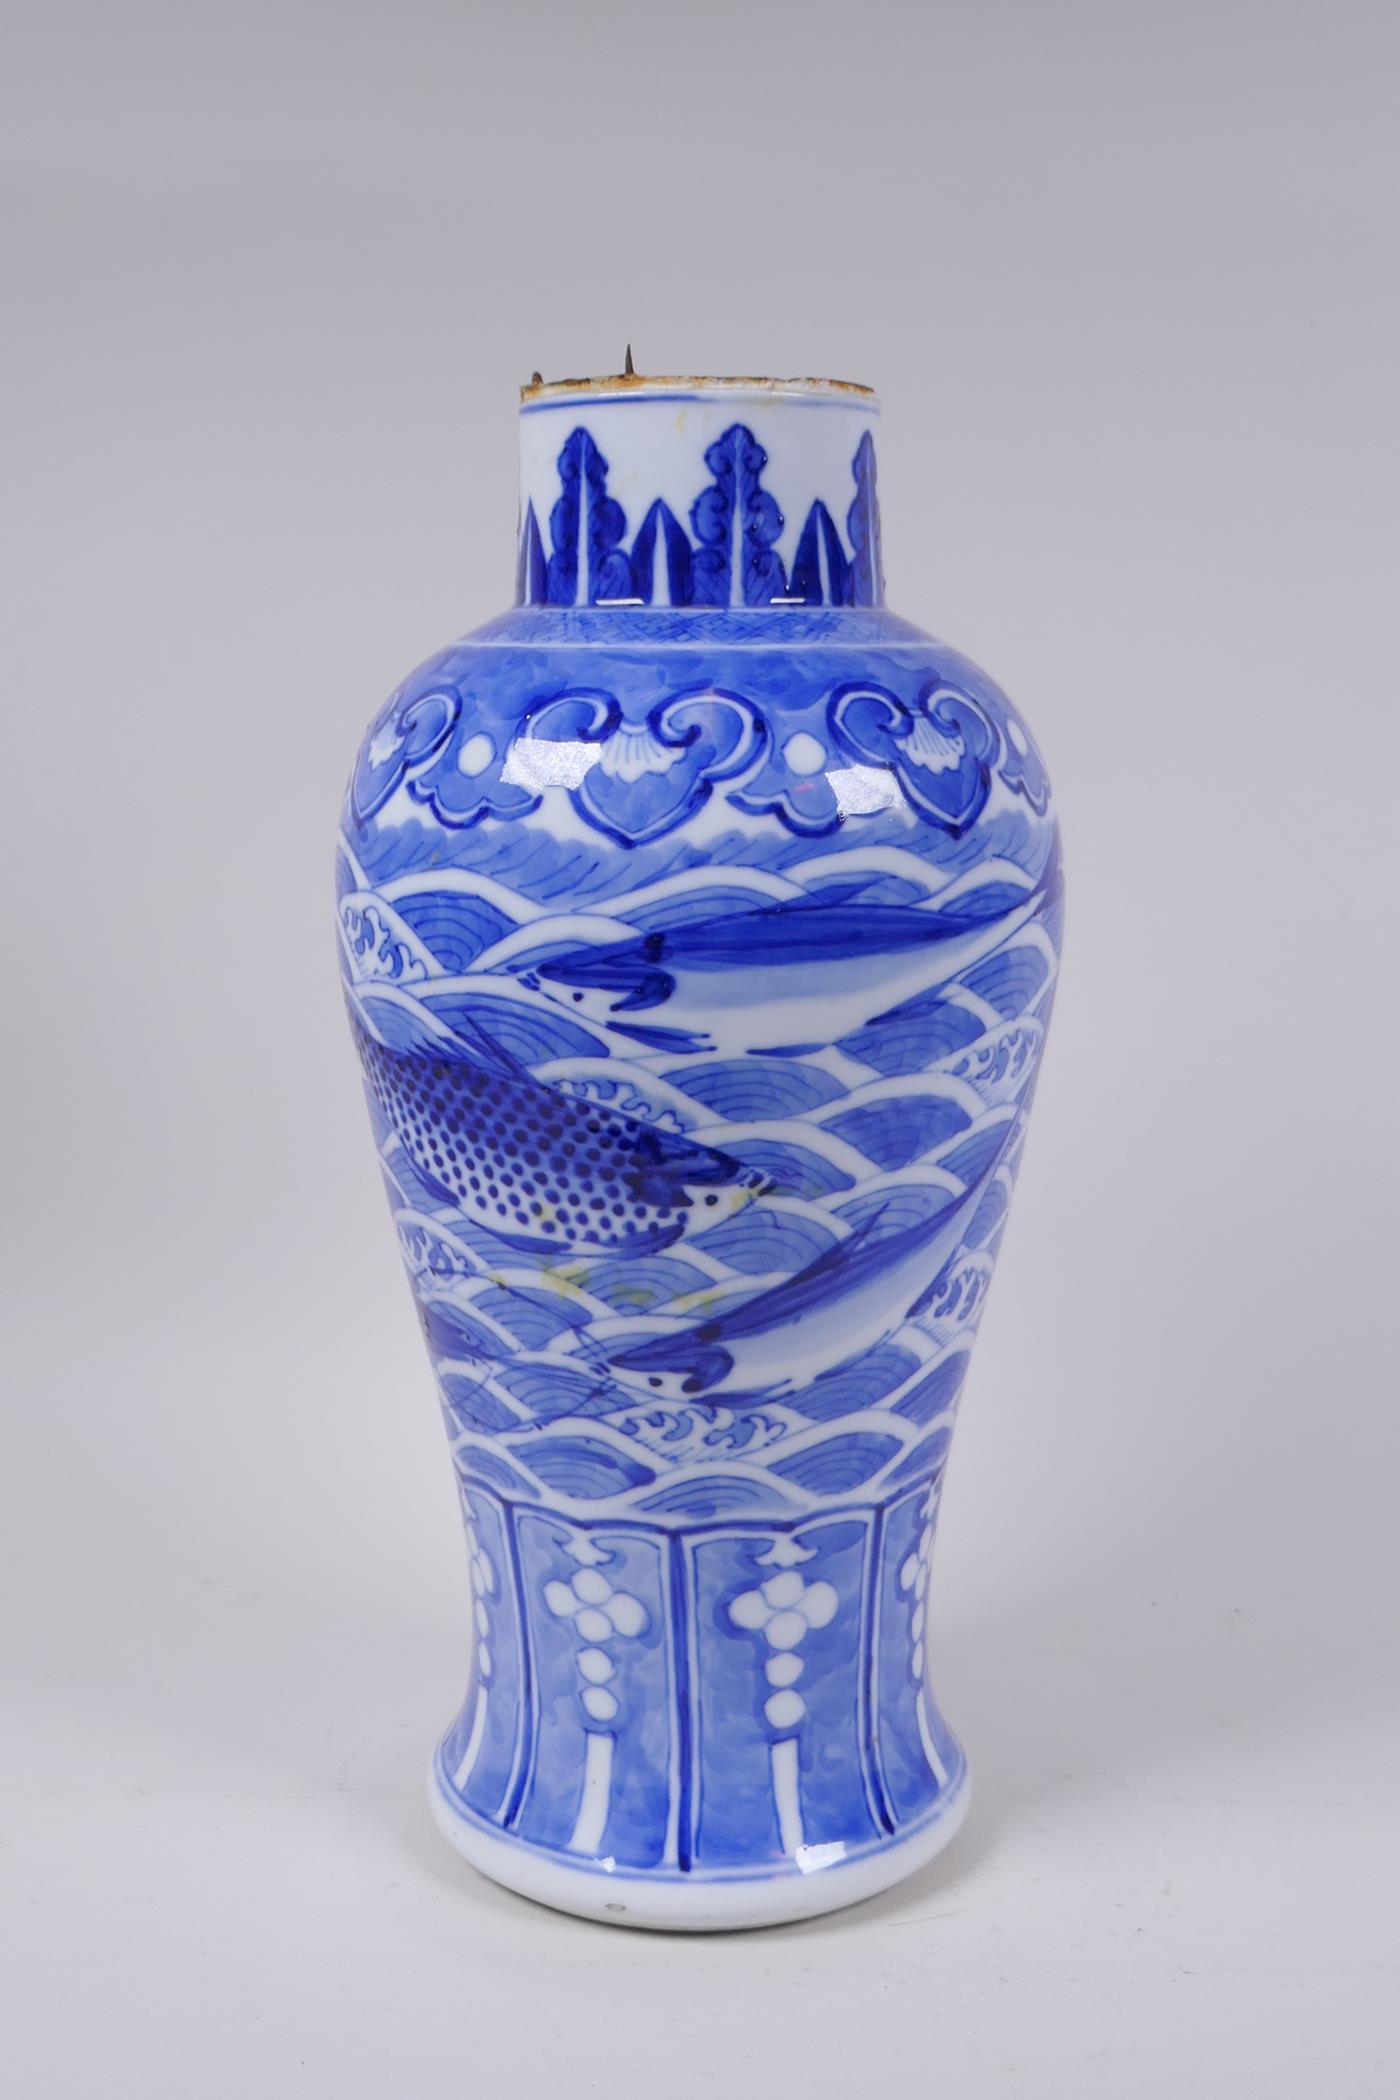 A C19th Chinese blue and white porcelain vase decorated with carp and crabs, Xuande 4 character mark - Image 6 of 9